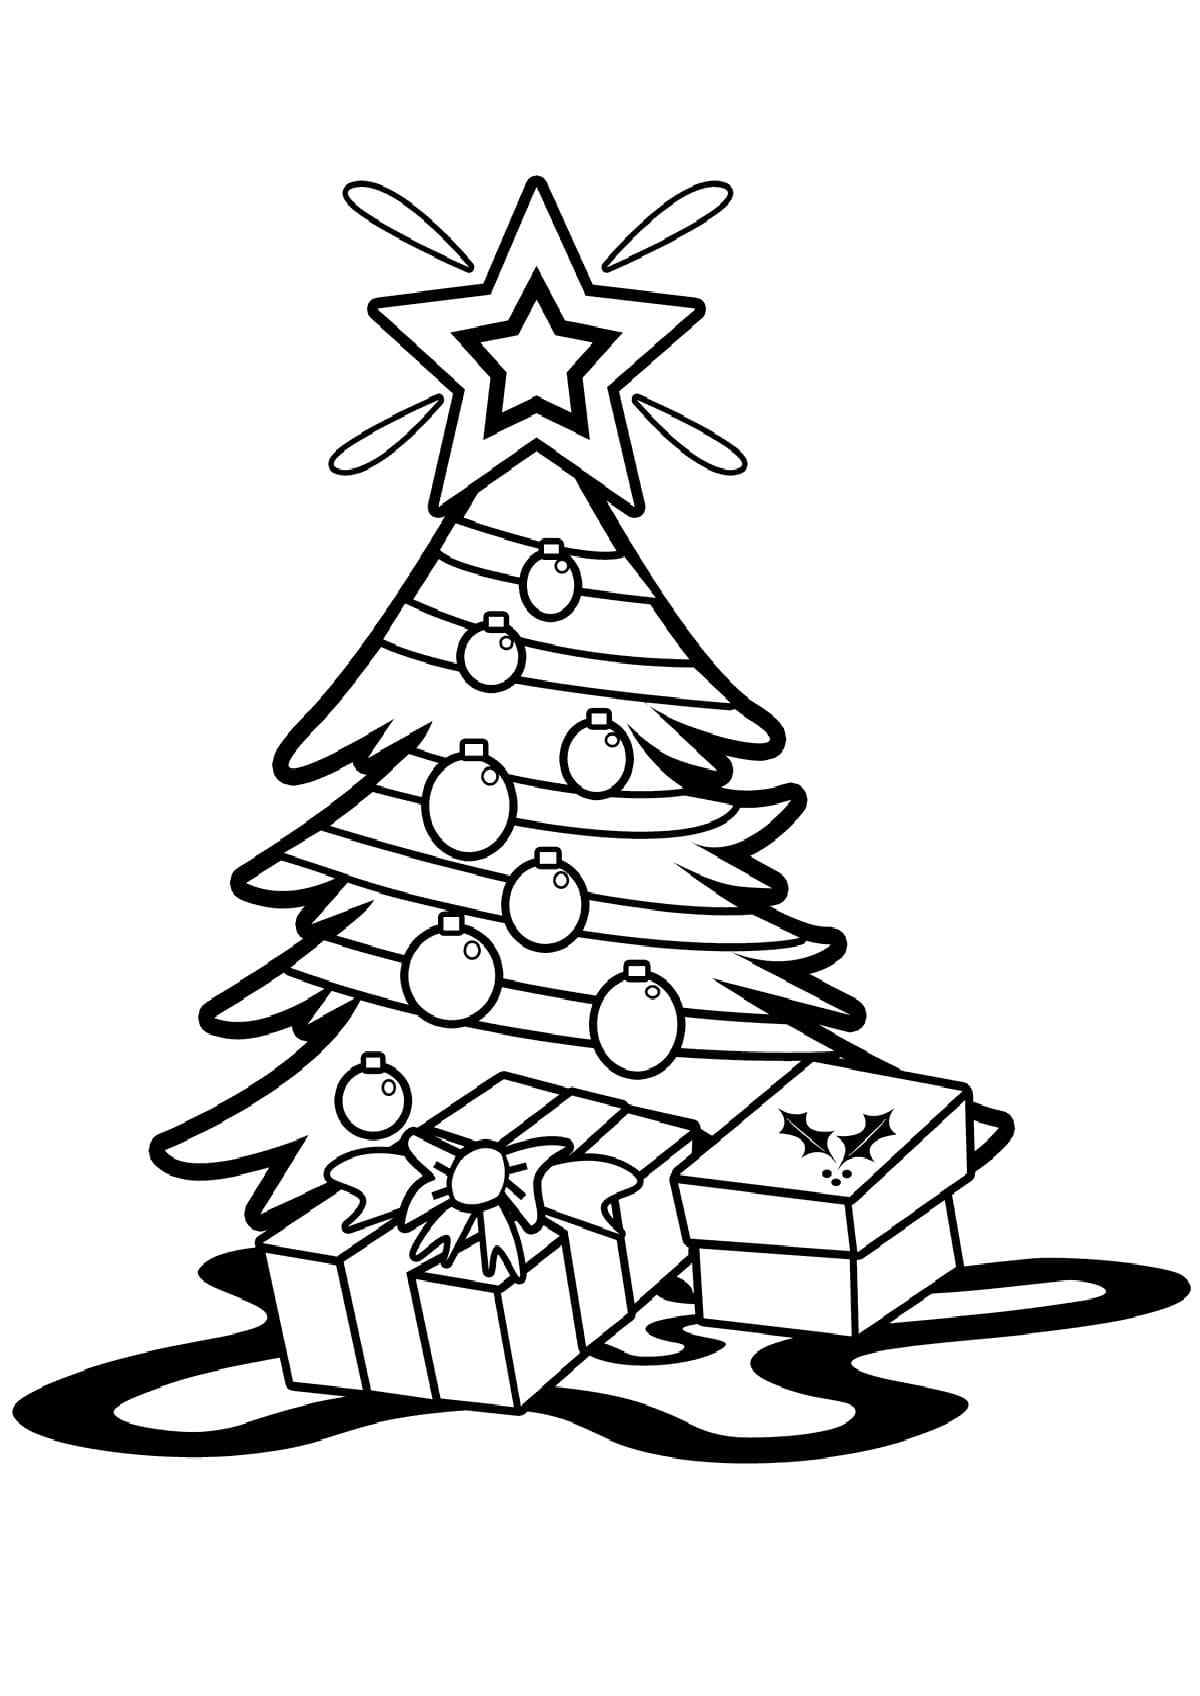 Choose A Gift Coloring Page